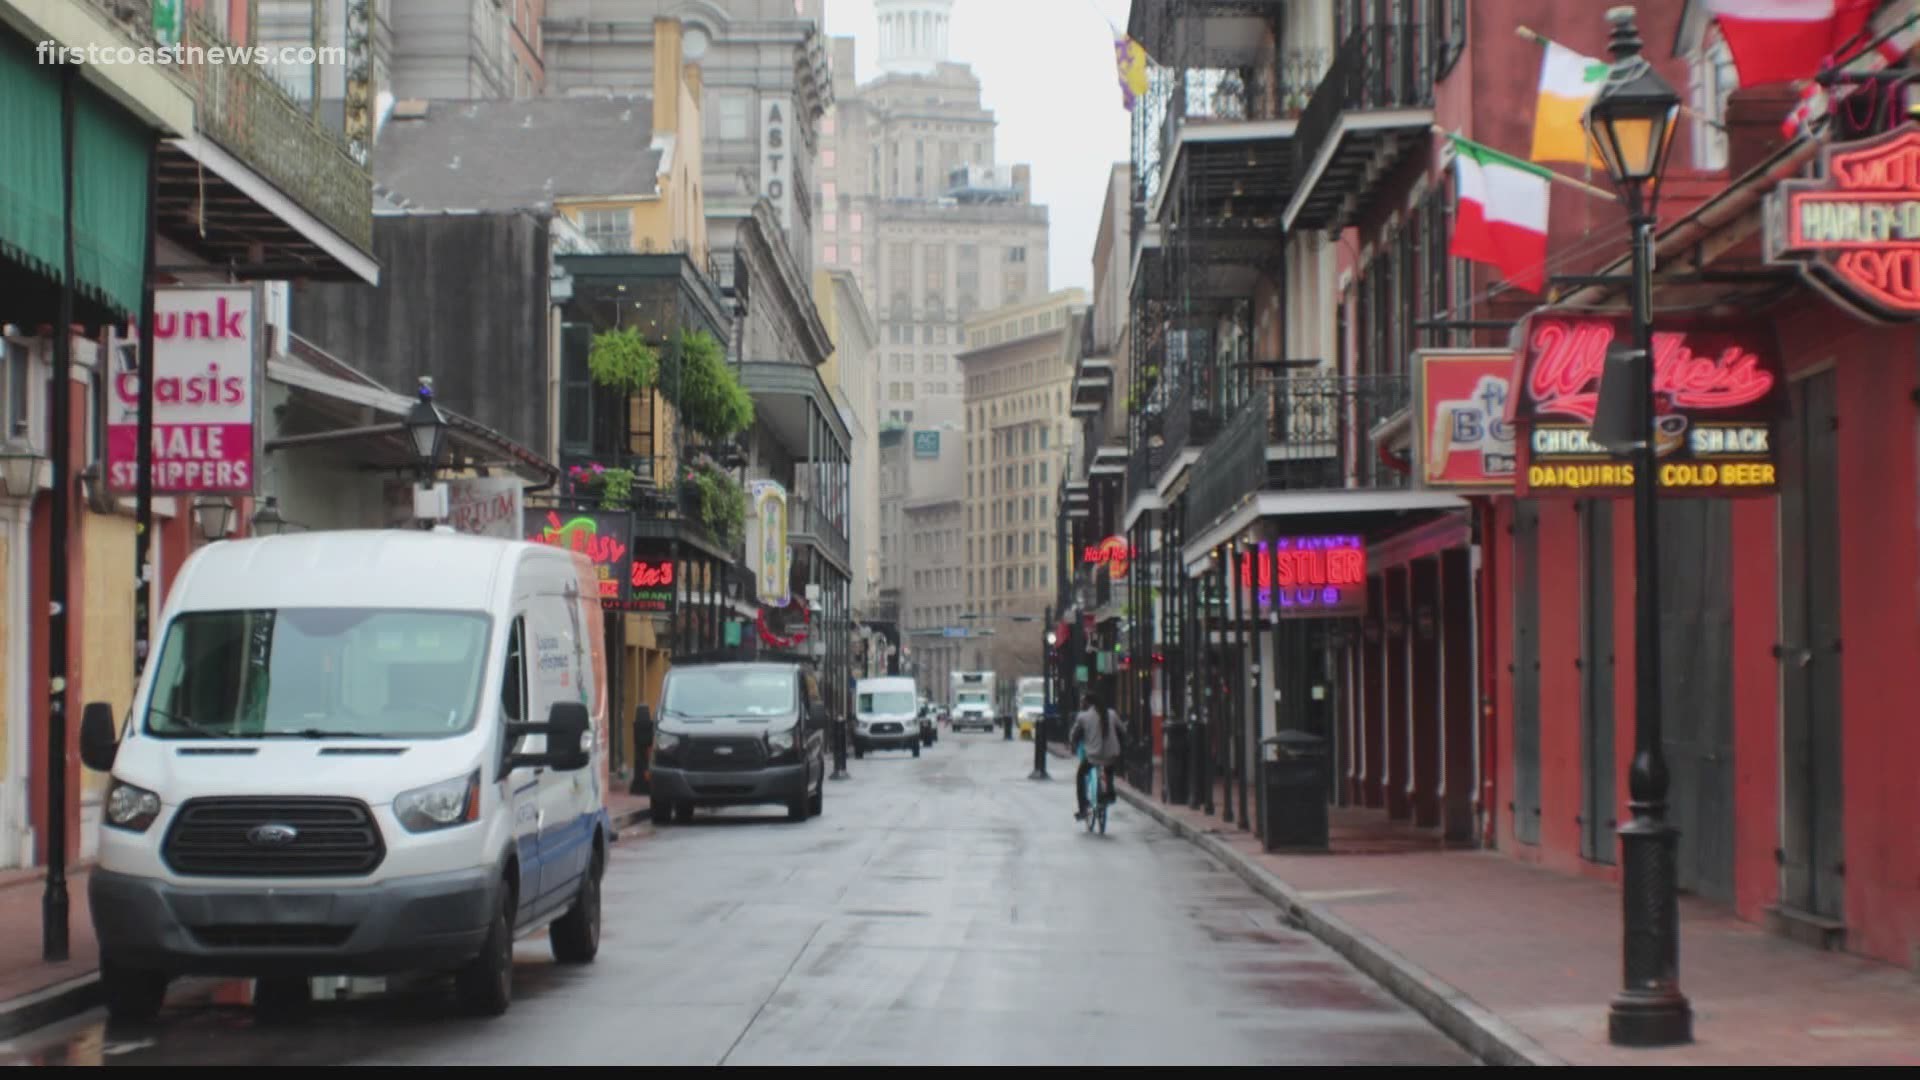 In one of the hearts of this epidemic, one New Orleans mom says she's not taking any chances.